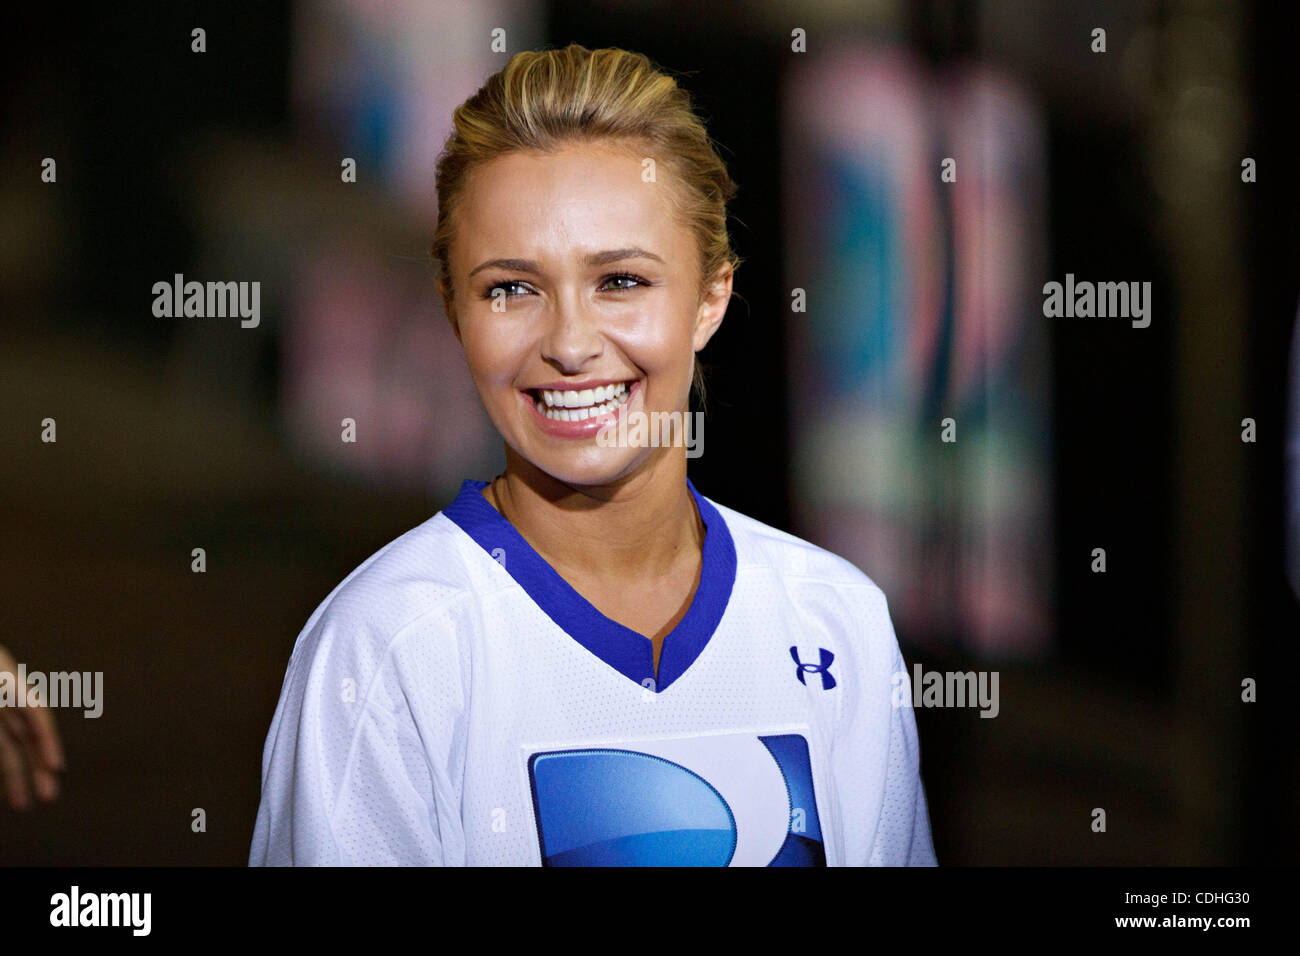 Feb. 5, 2011 - Dallas, Texas, US - Actress Hayden Panettiere participating in the DirecTV Celebrity Beach Bowl Bash during Super Bowl XLV week at Victory Park in Dallas, Texas. (Credit Image: © Andrew Dieb/Southcreek Global/ZUMAPRESS.com) Stock Photo